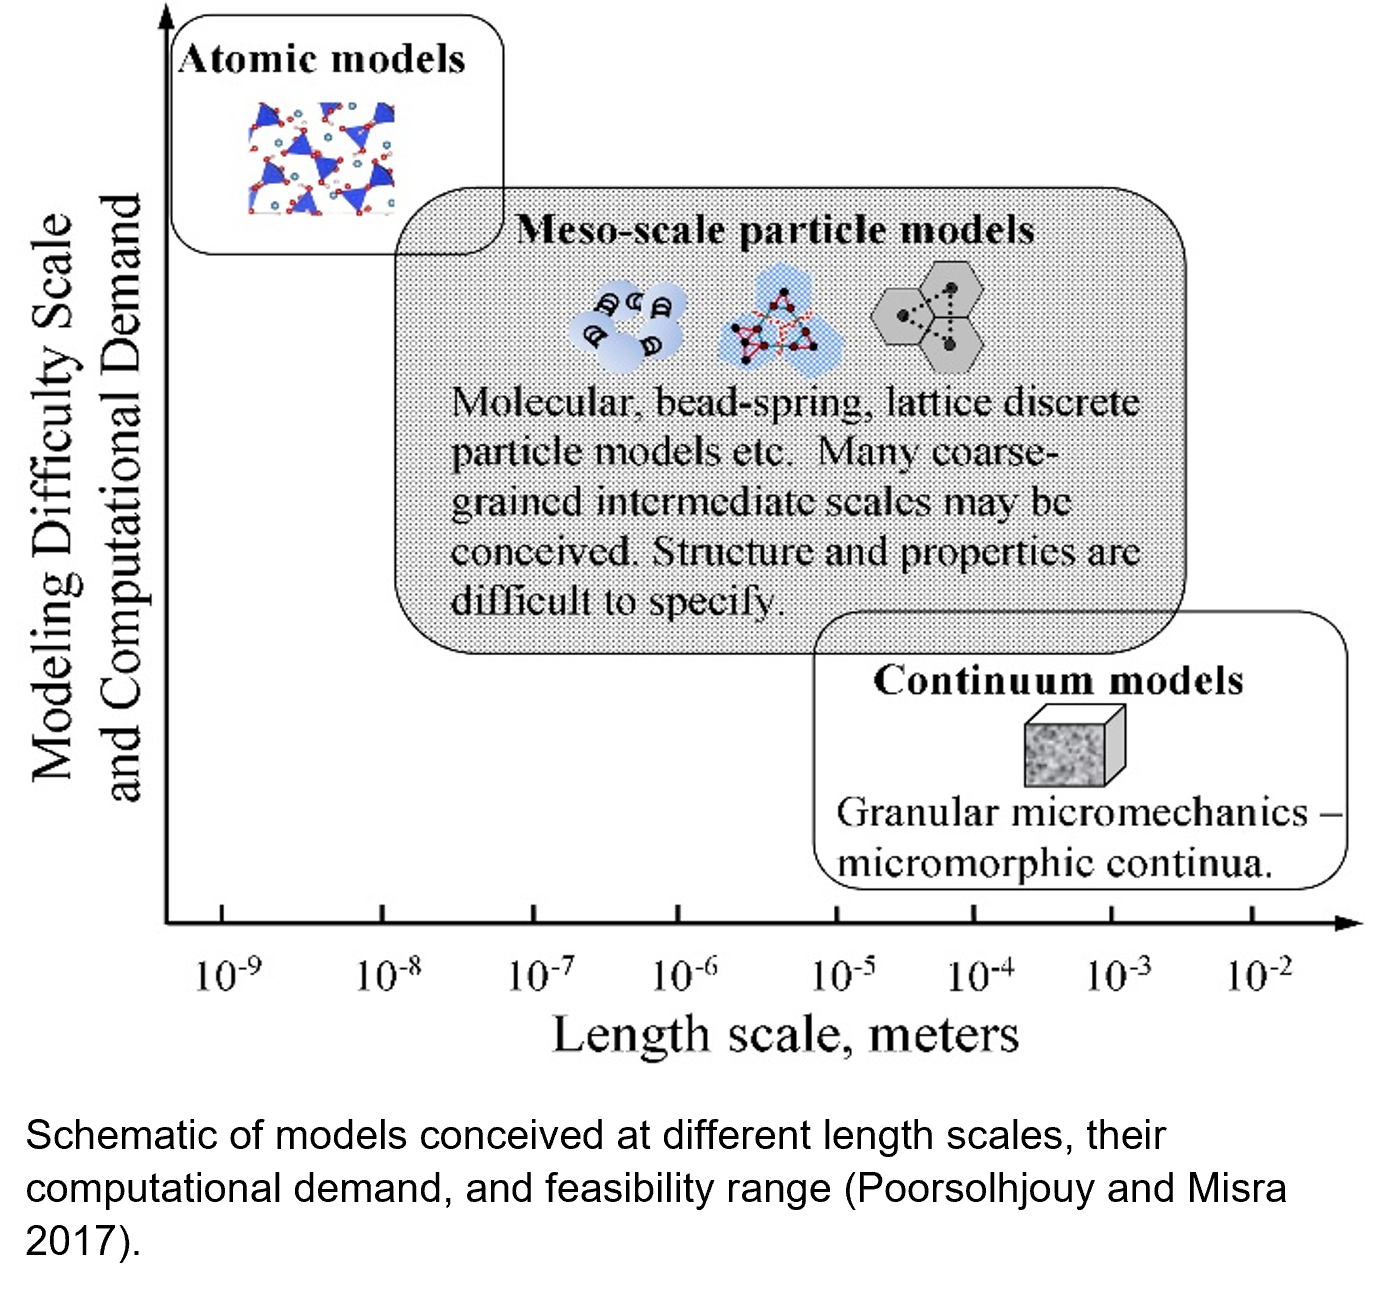 Schematic of models conceived at different length scales, their computational demand, and feasibility range (Poorsolhjouy and Misra 2017).